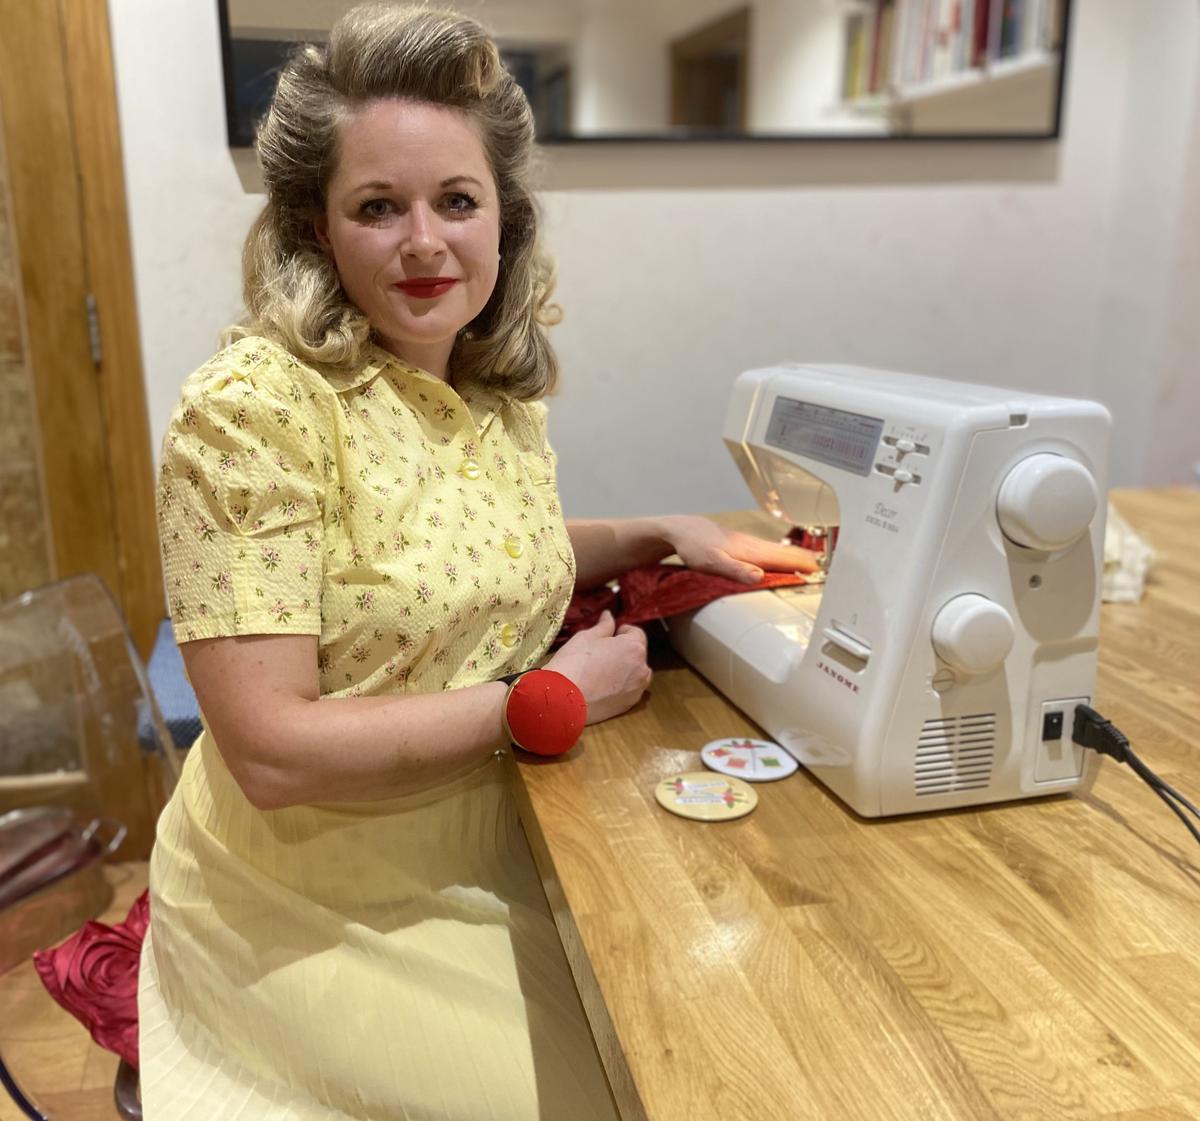 Rosie, 39, at her sewing machine. (Kennedy News and Media)